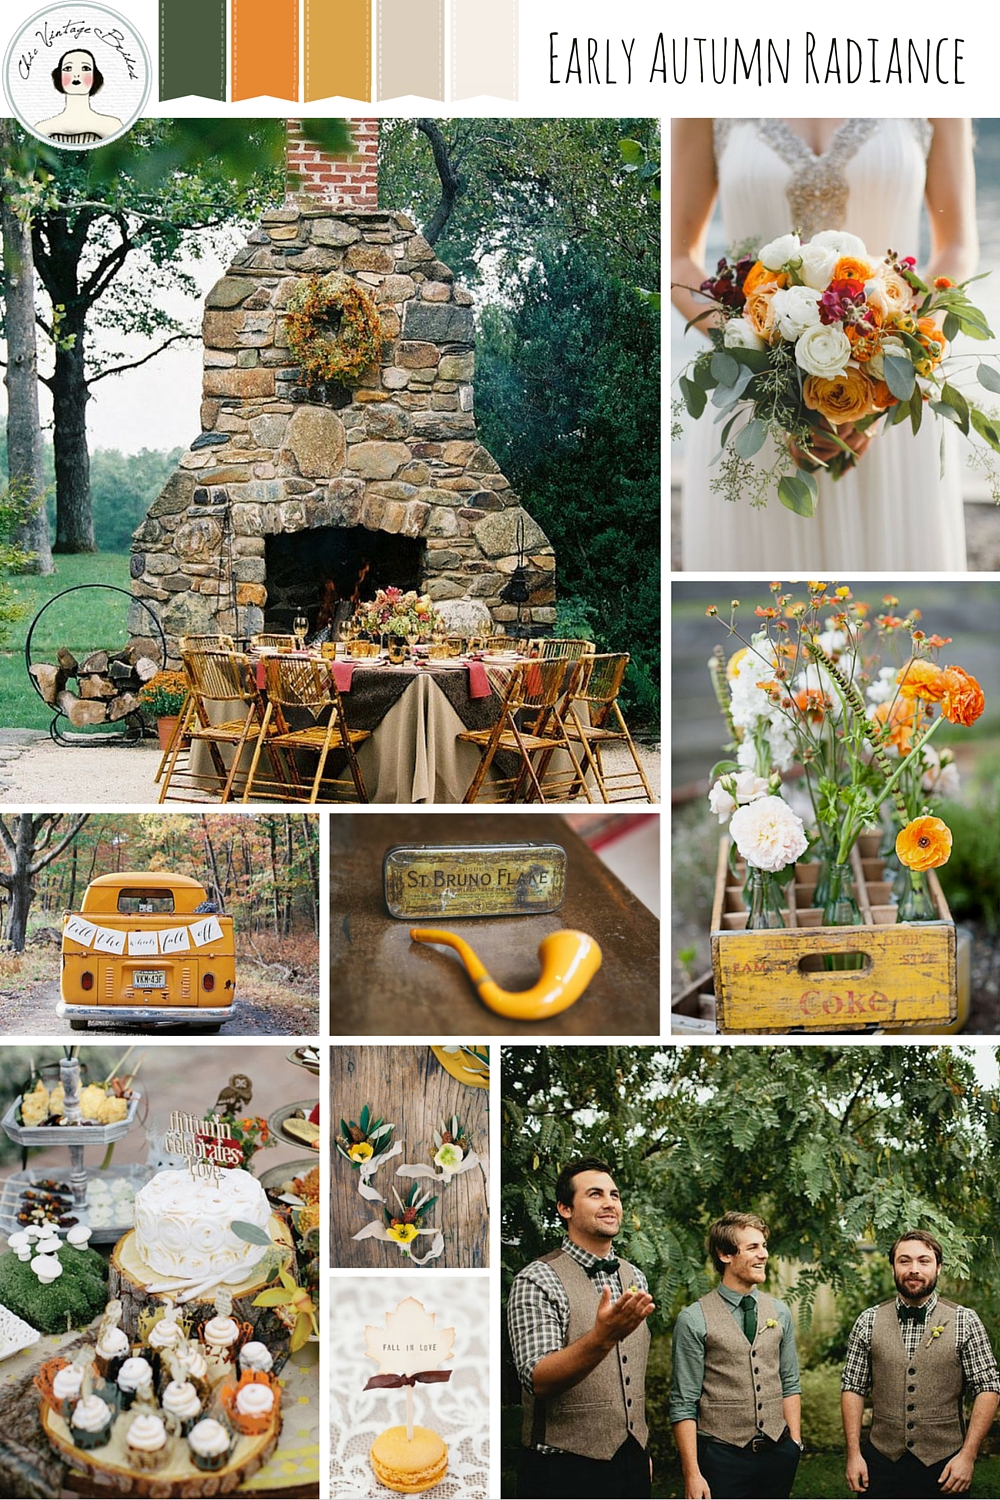 Early Autumn Radiance – Rustic Autumn Wedding Inspiration in Rich Fall Shades